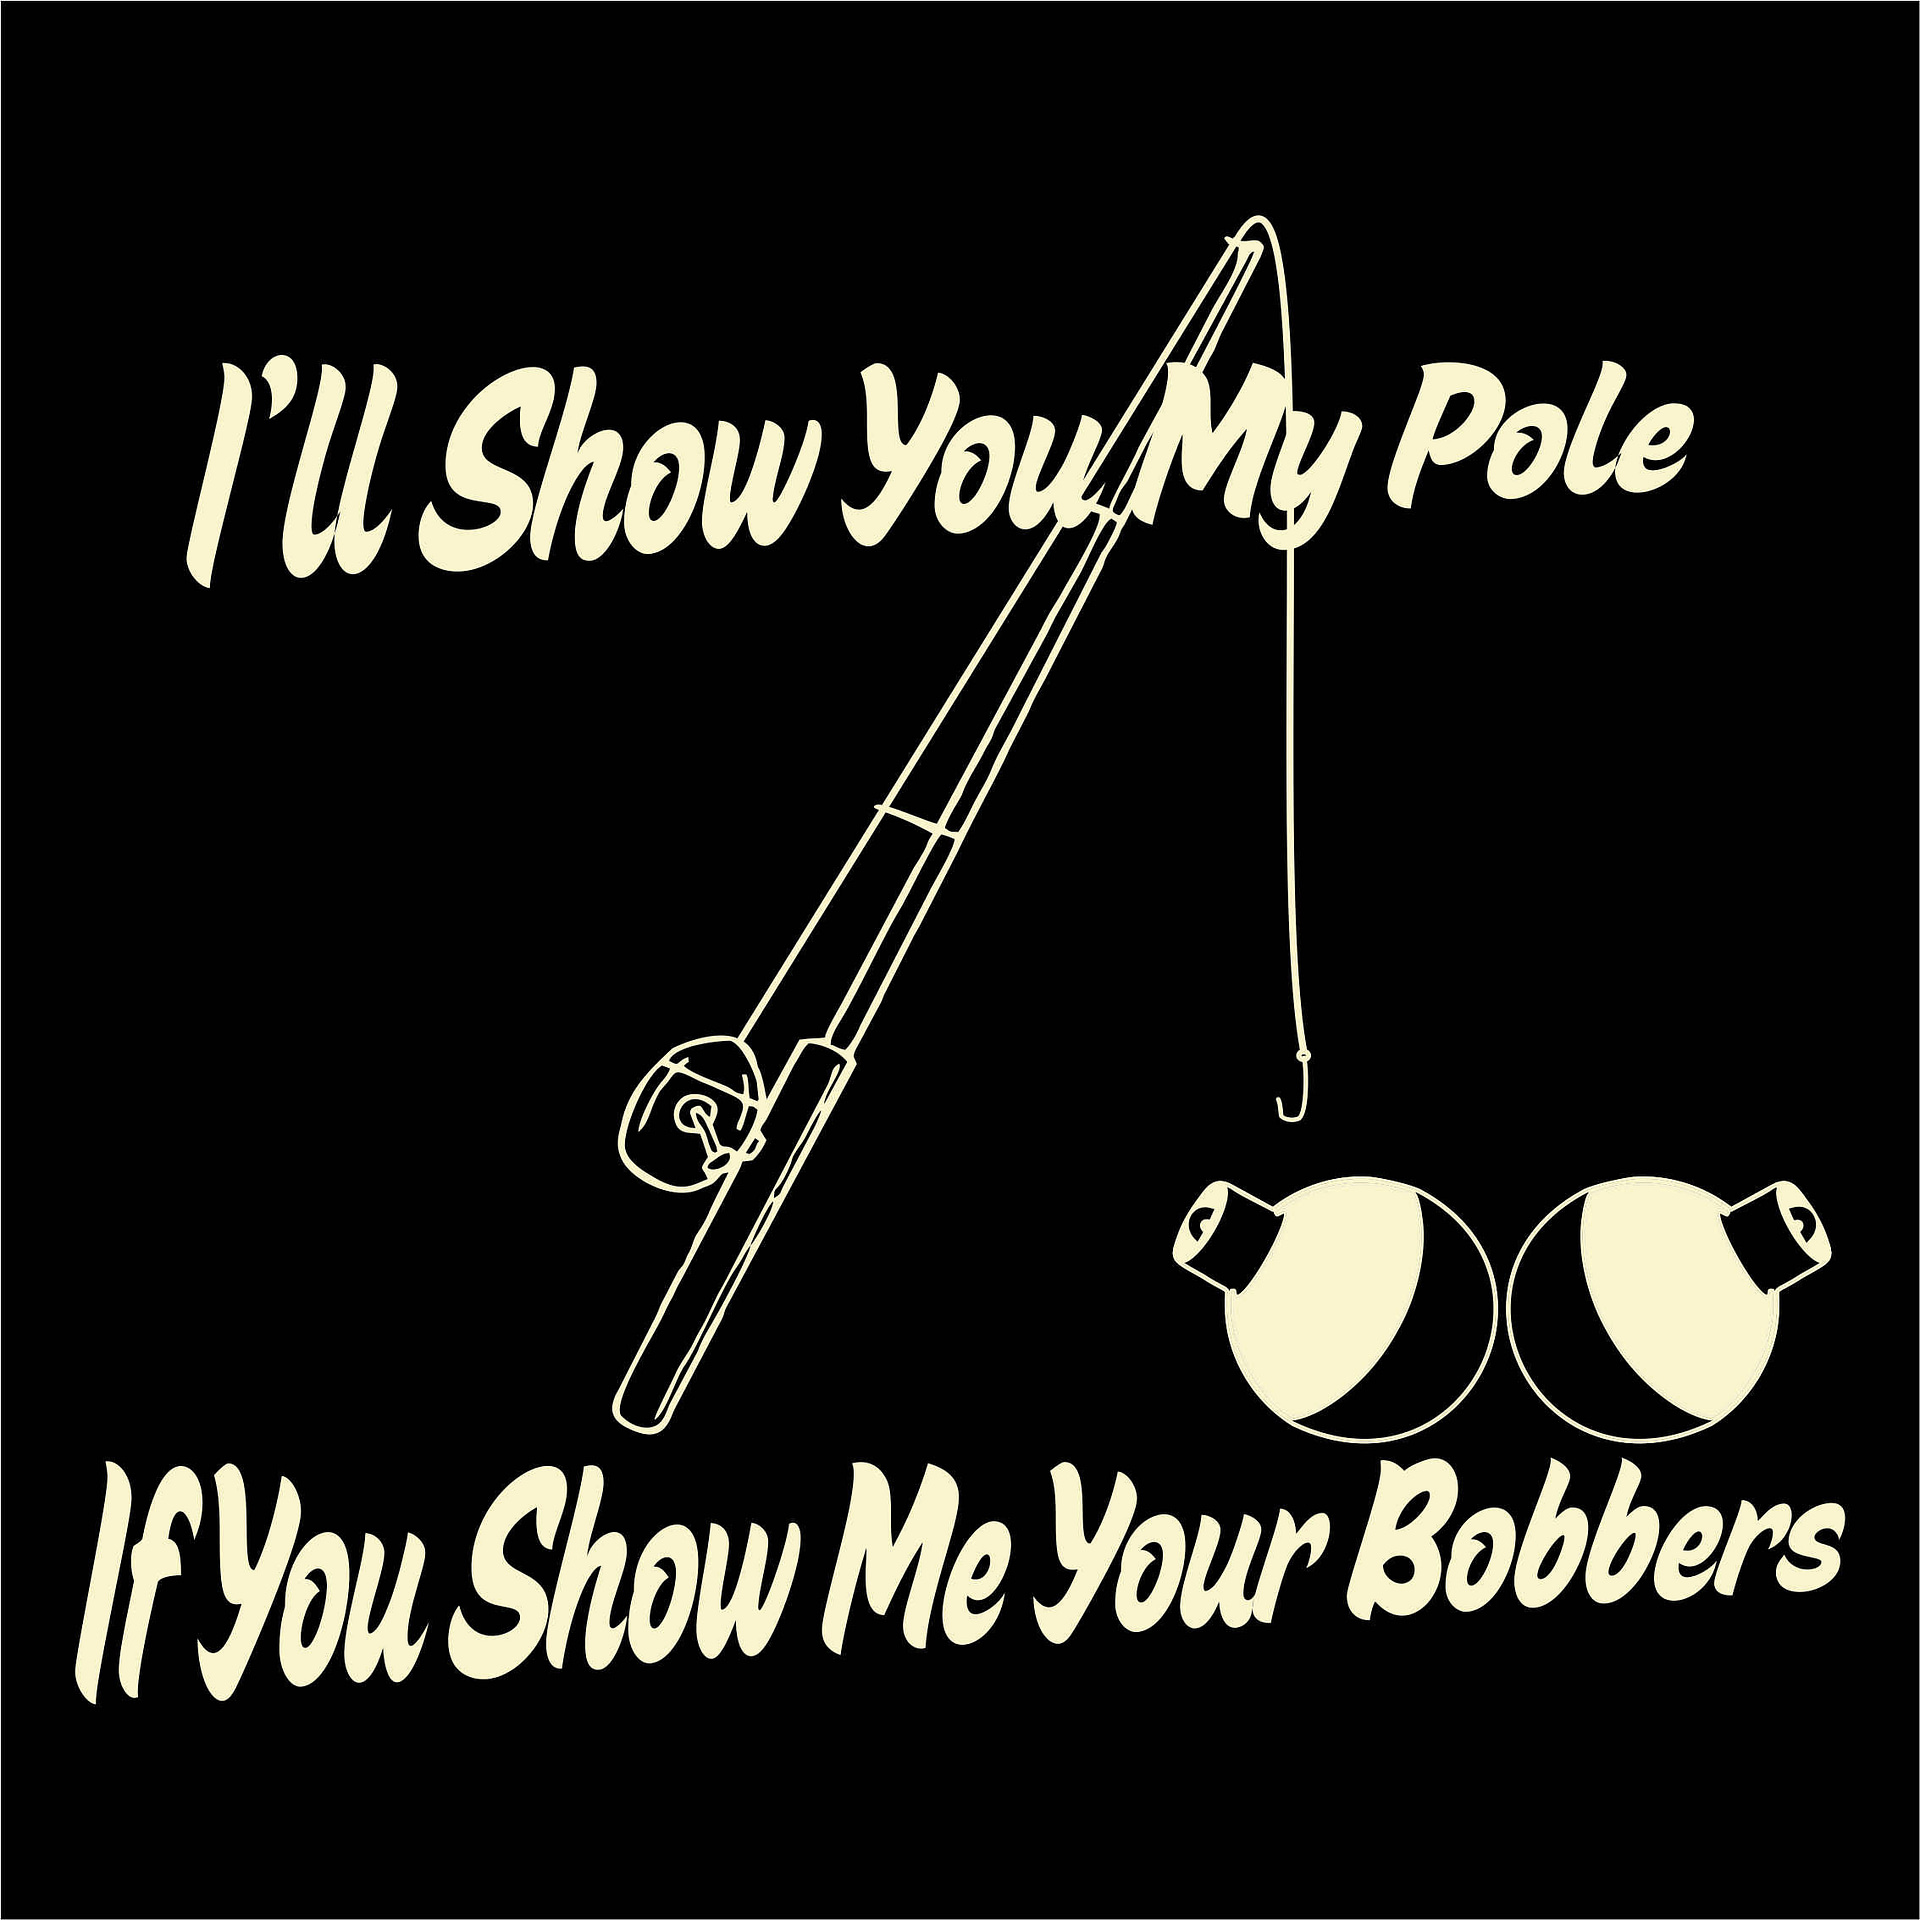 I'll Show You My Pole If You Show Me Your Bobbers – Fishing Shirt